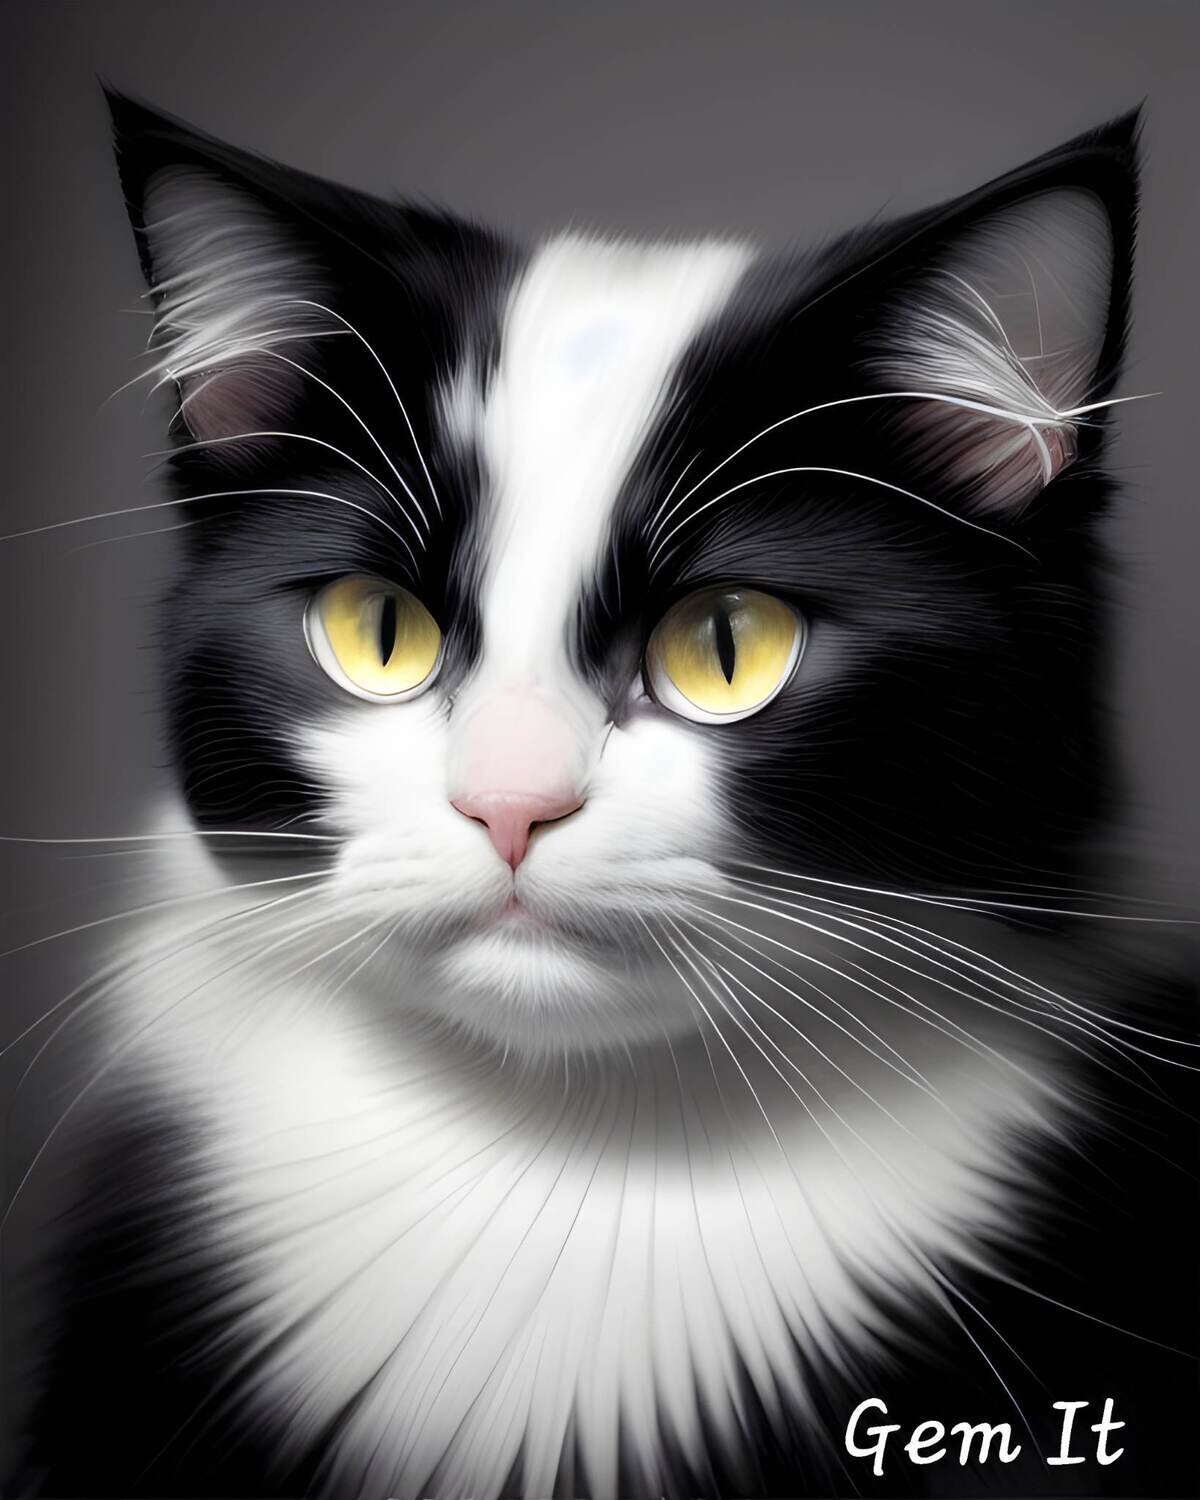 Black and White Cat 218 - Specially ordered for you. Delivery is approximately 4 - 6 weeks.